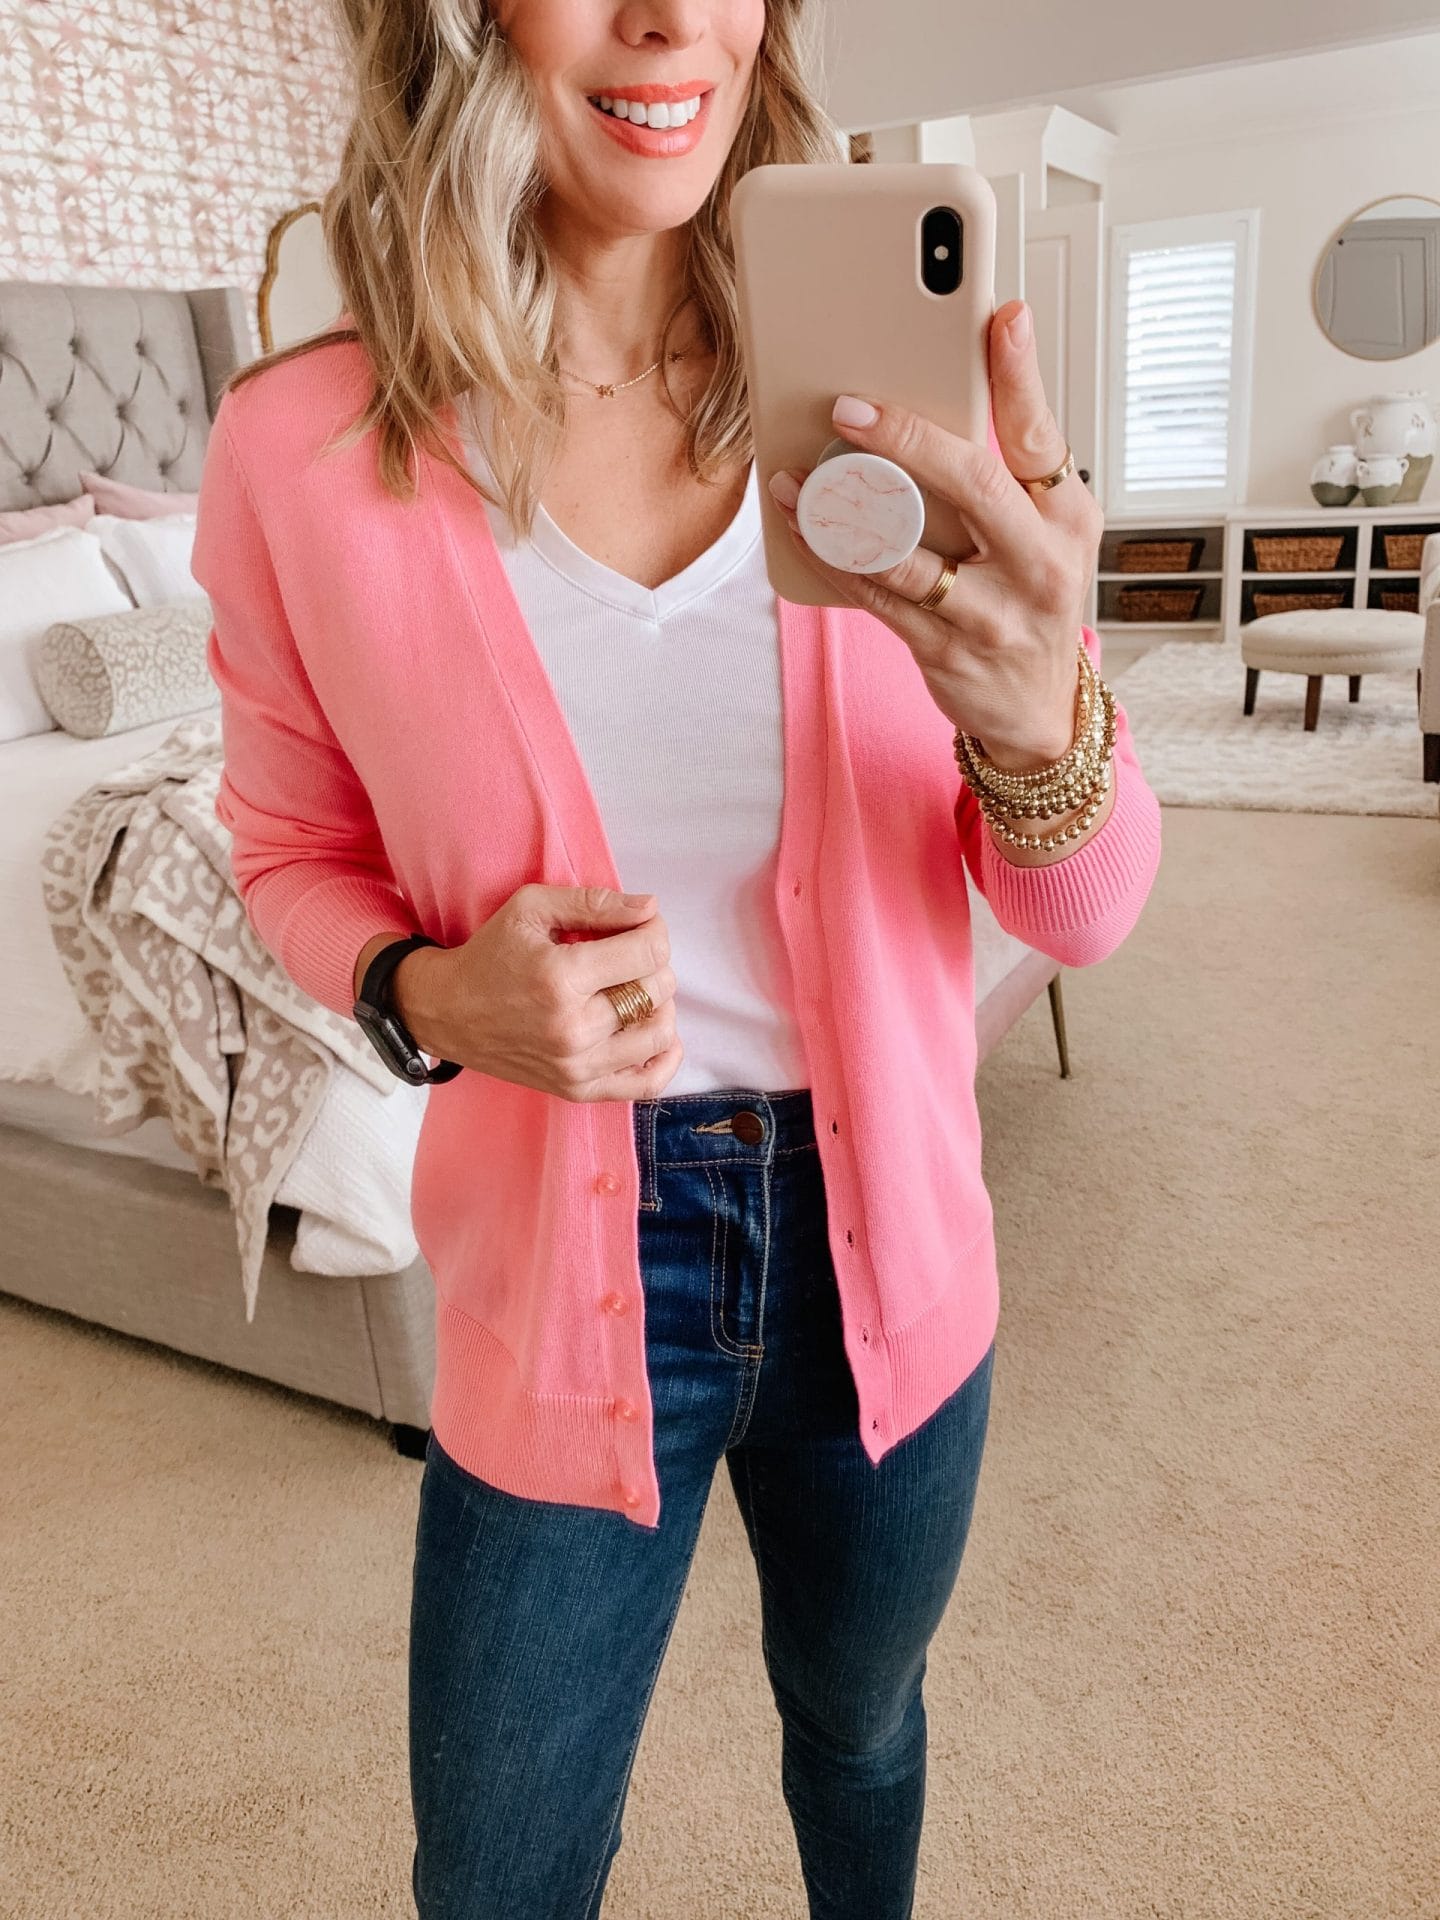 Amazon Fashion Finds, Cardigan, Tee and Jeans with Heels 